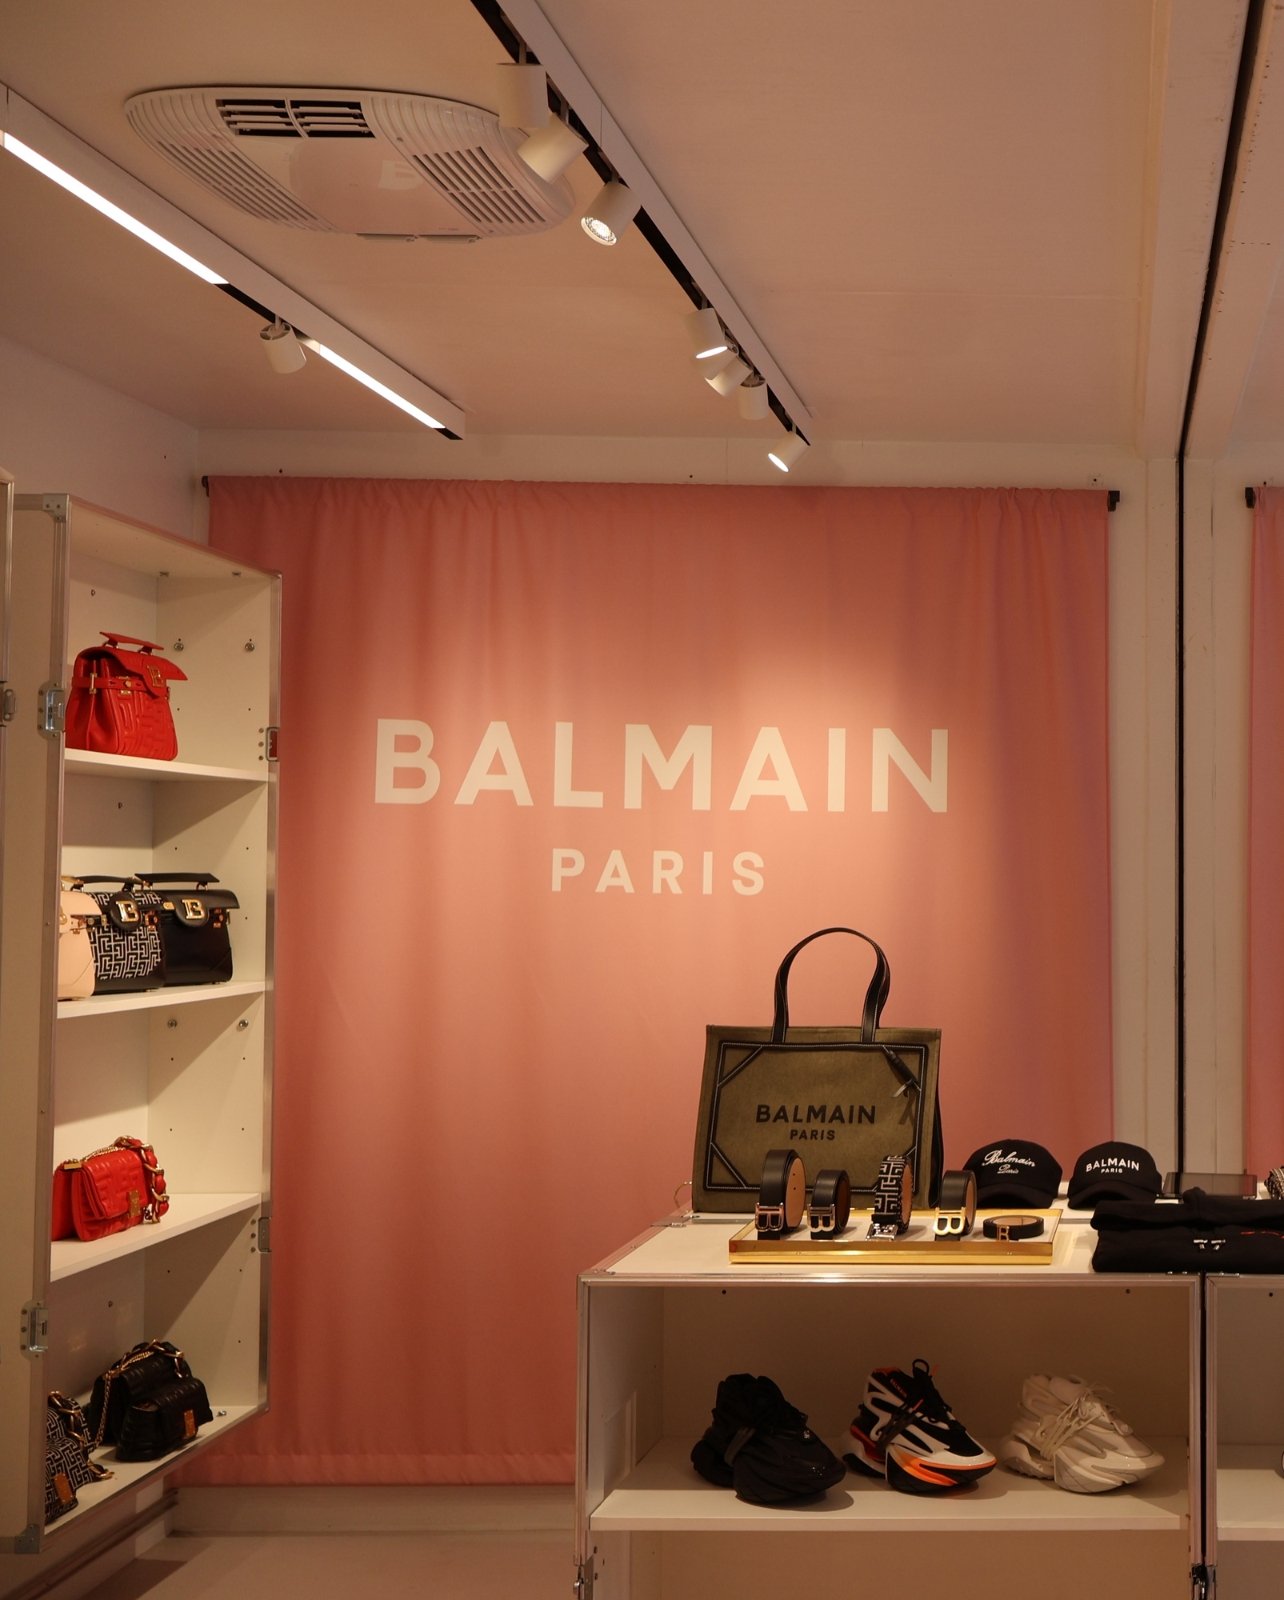 Portrait of the interior of the temporary Balmain storefront at Bal Harbour Shops